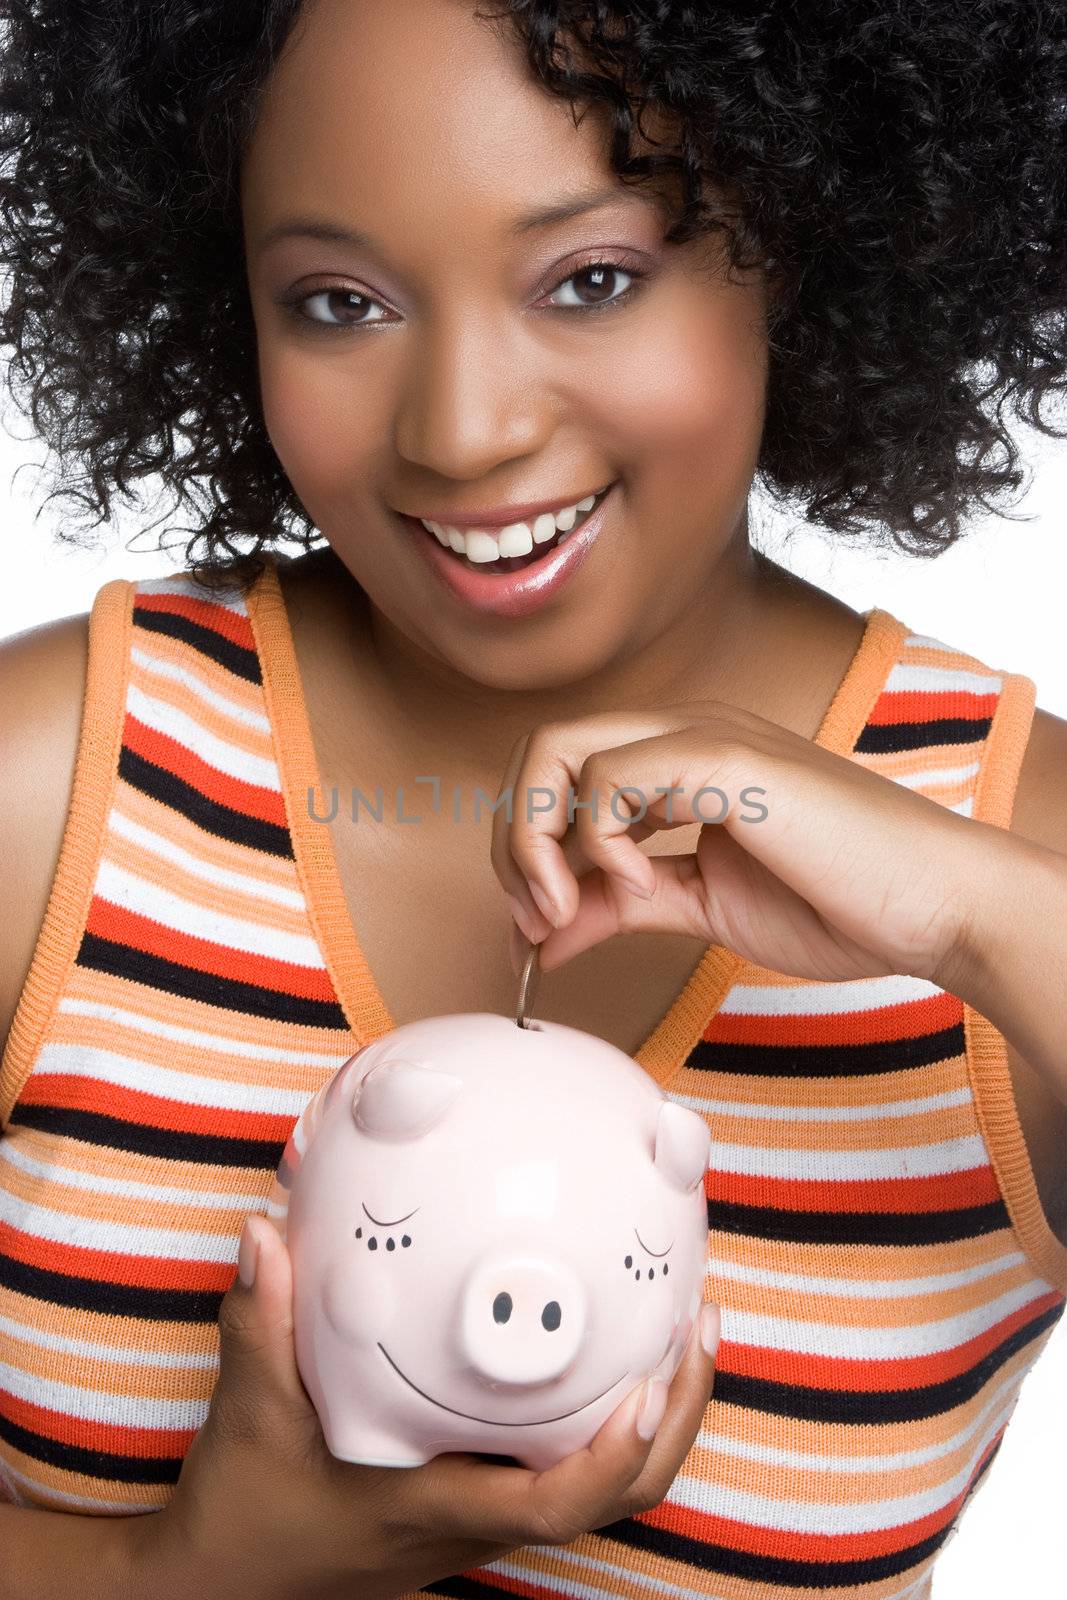 Woman dropping coin in money pig